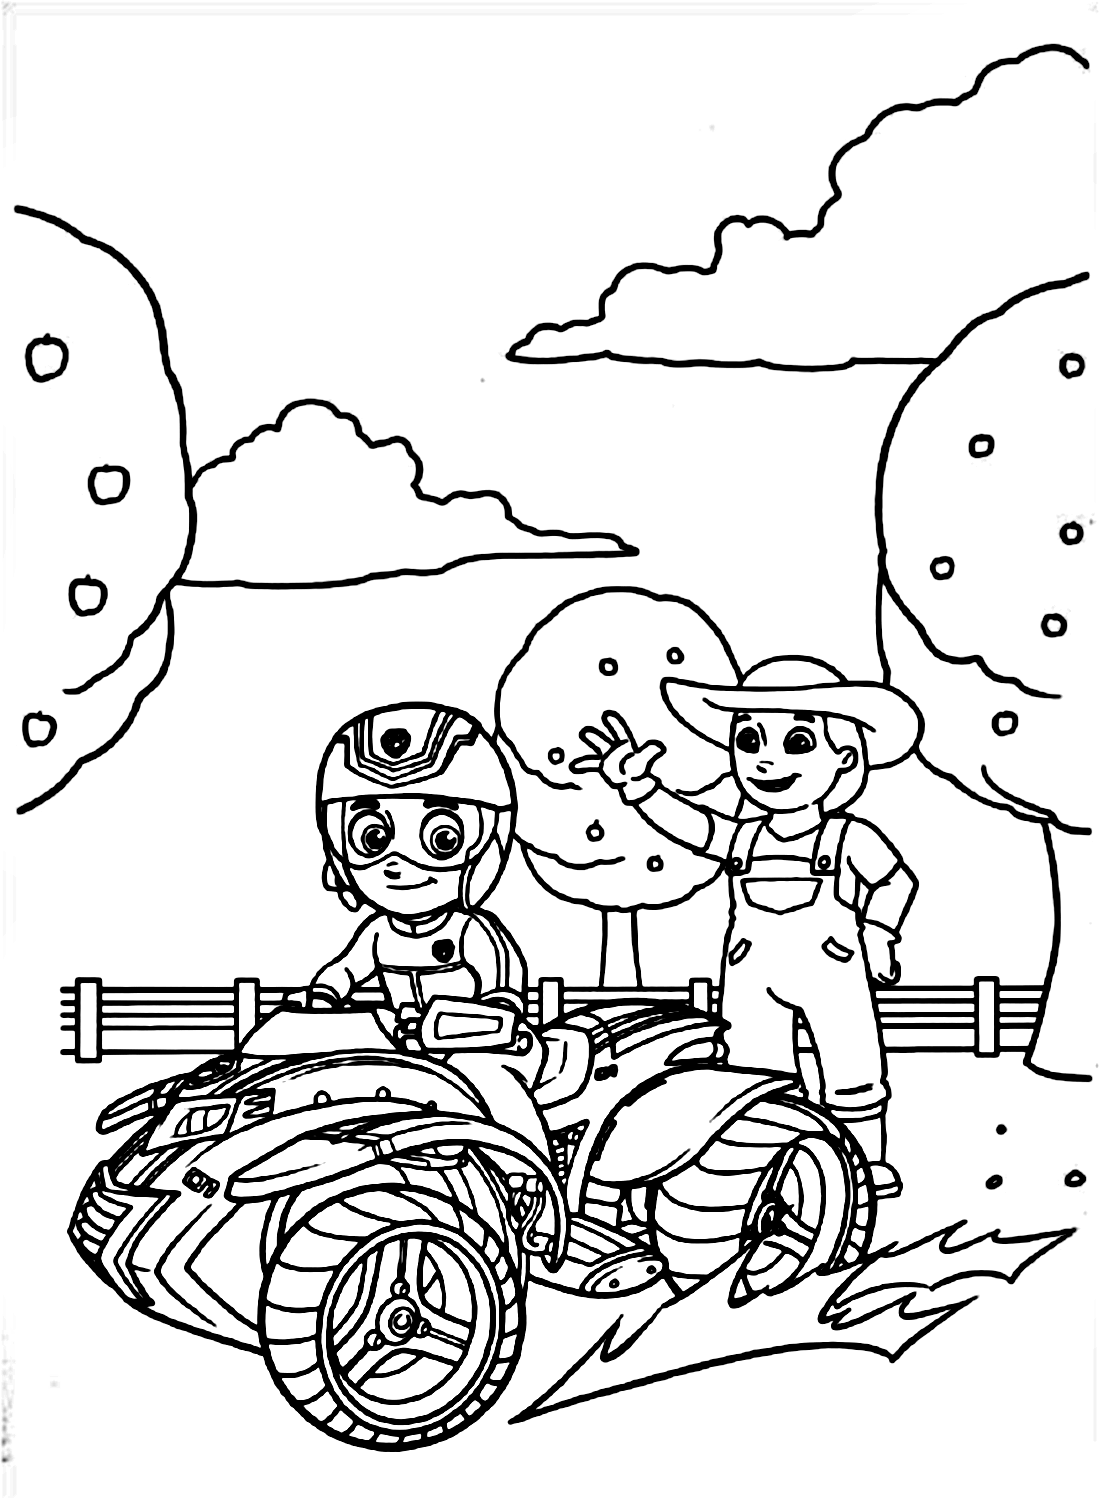 Paw Patrol Ryder with Farmer Yumi Coloring Page